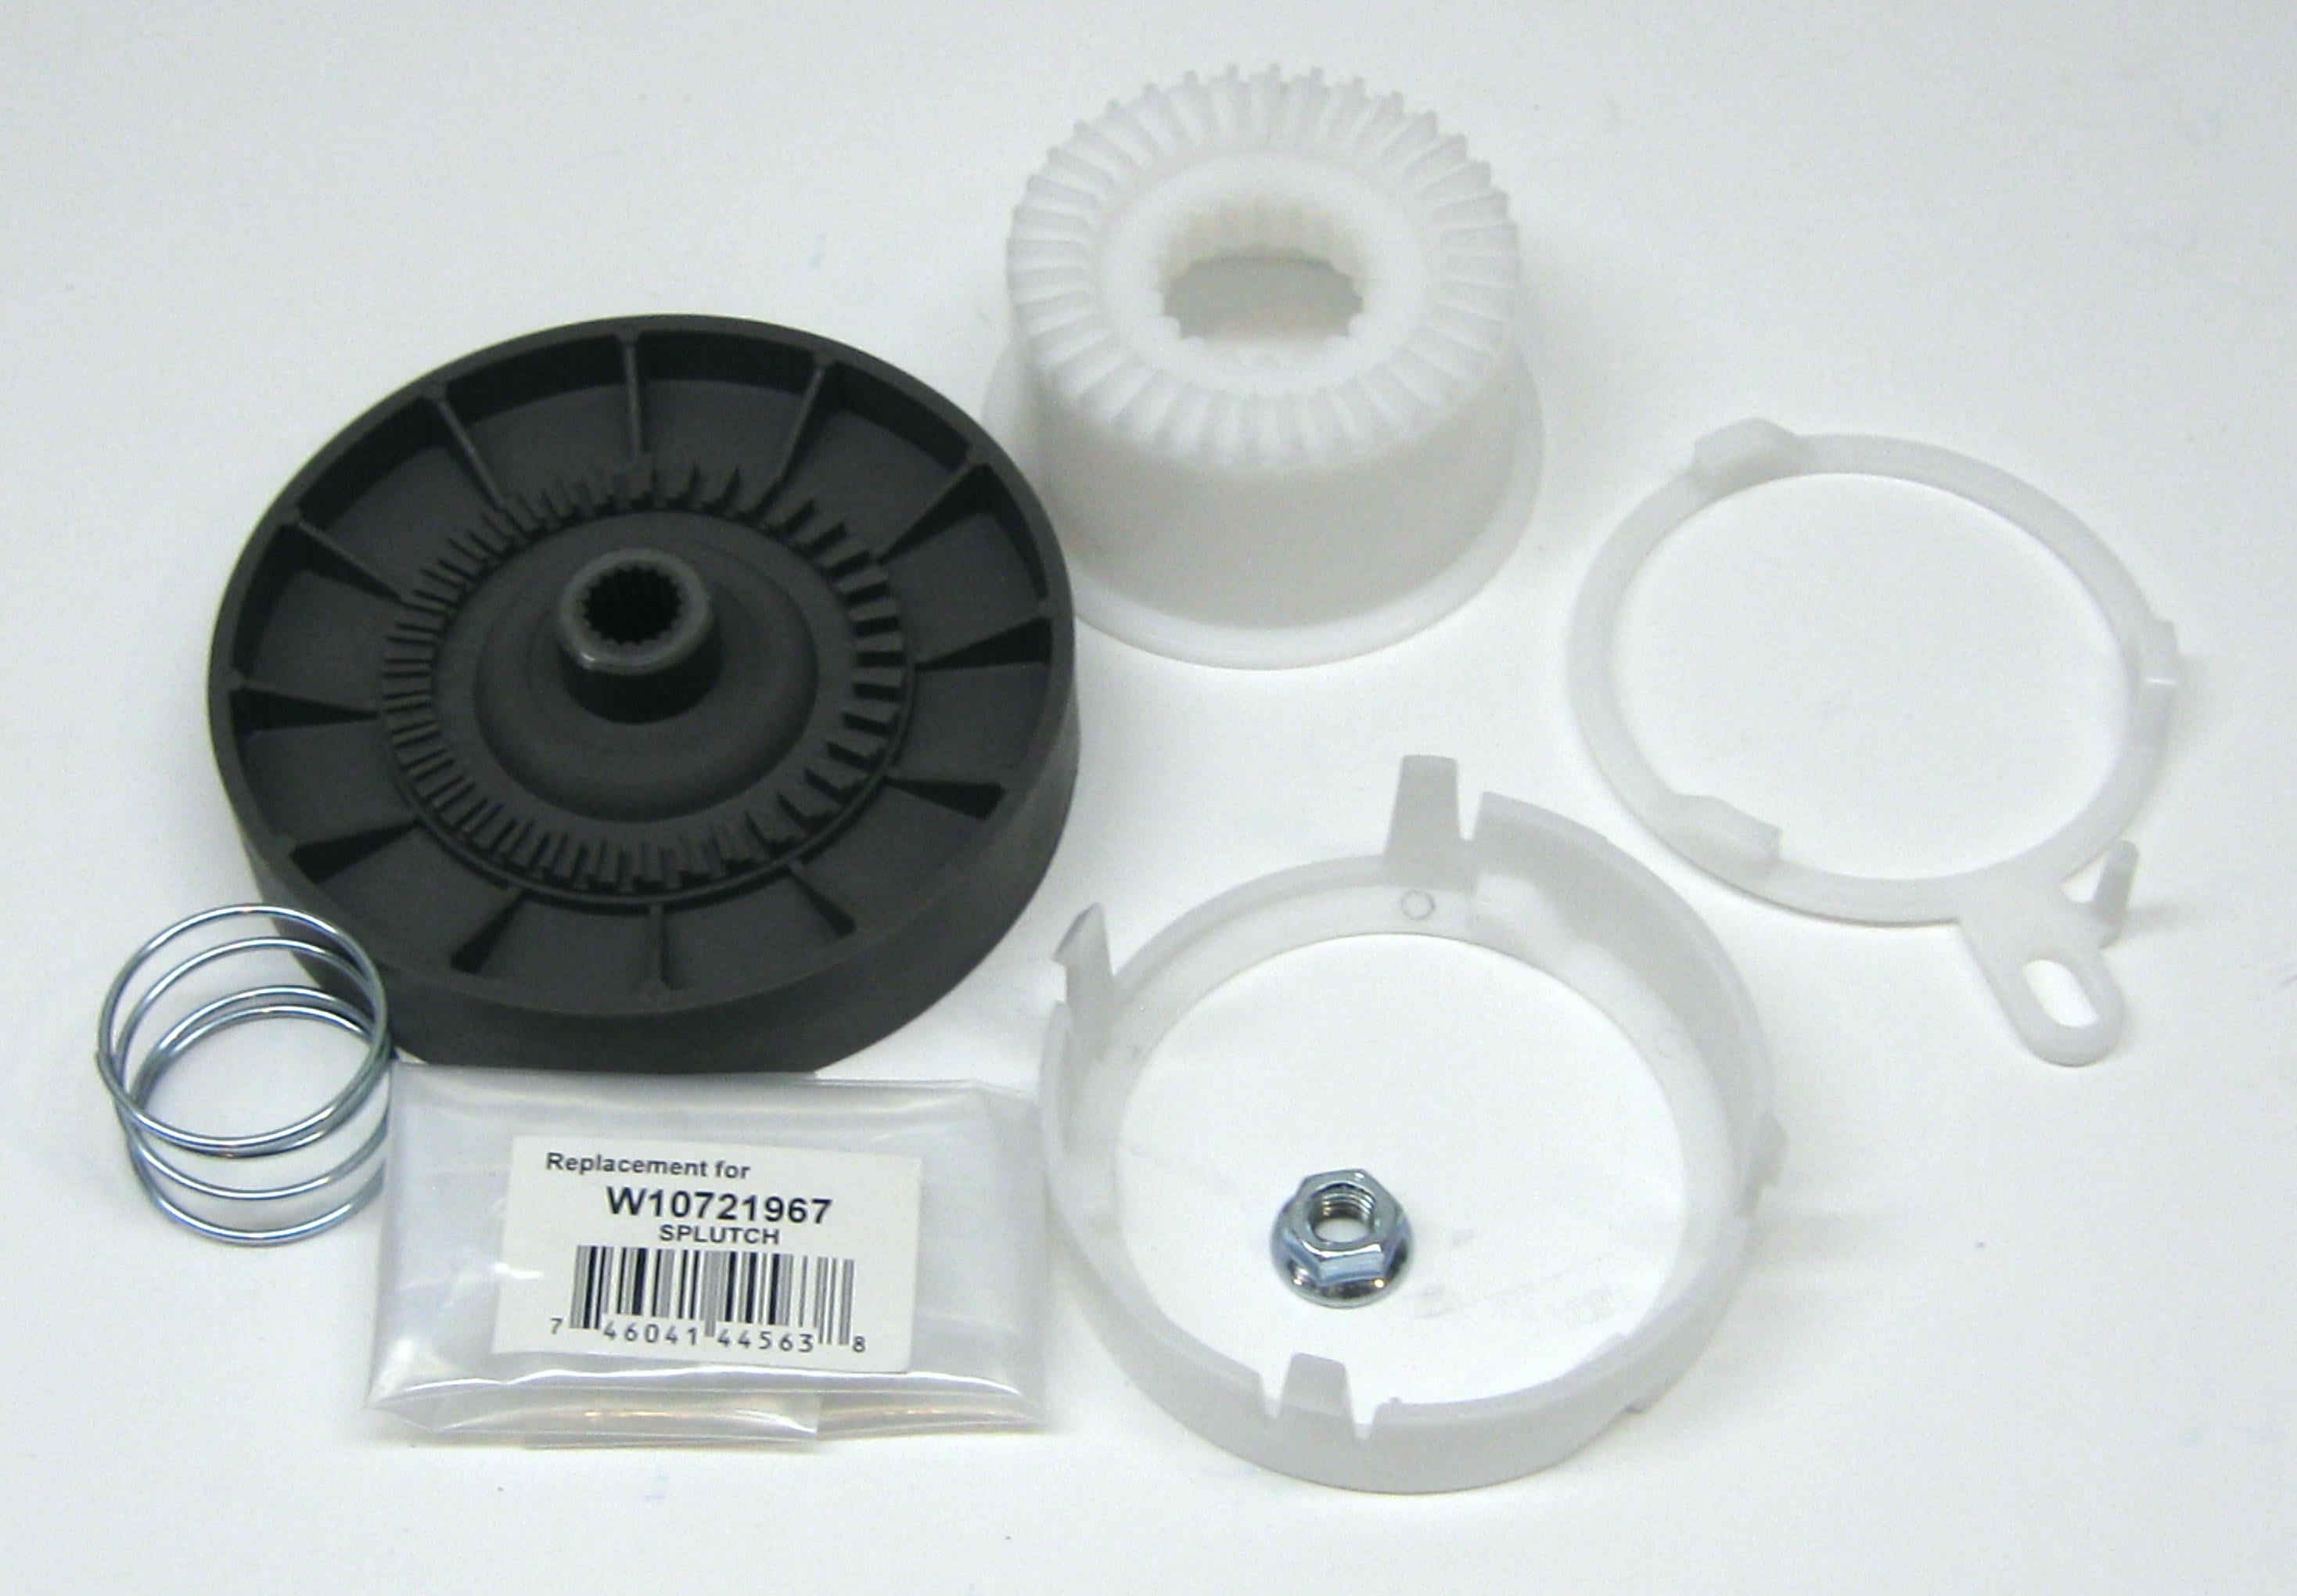 Washer Cam Splutch Kit for Whirlpool Kenmore Maytag Washer W10721967 